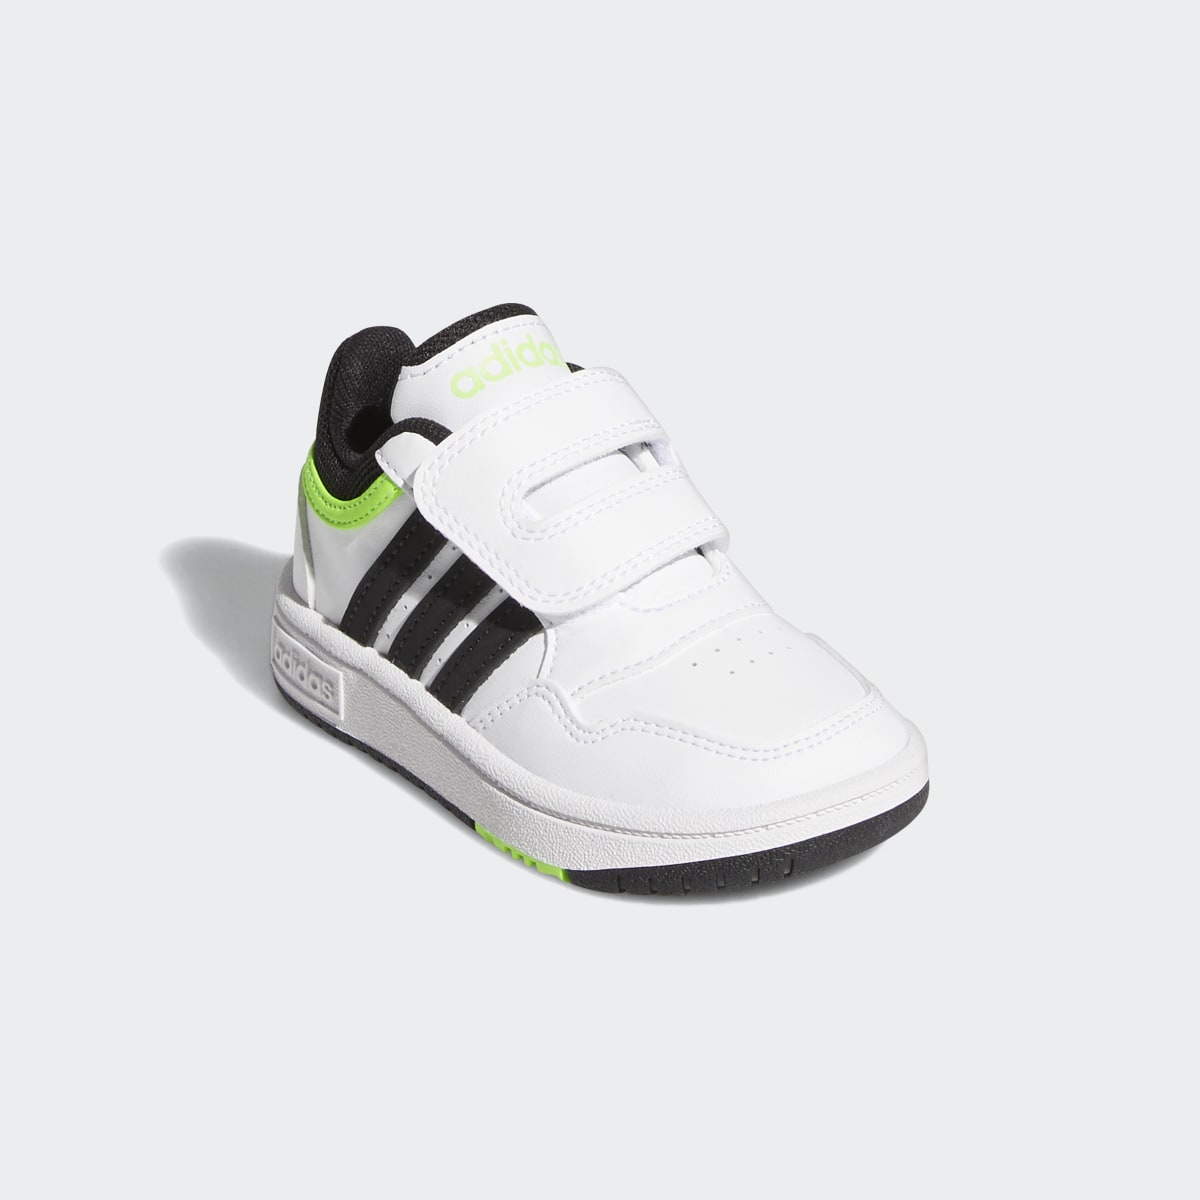 Adidas Hoops Shoes. 5